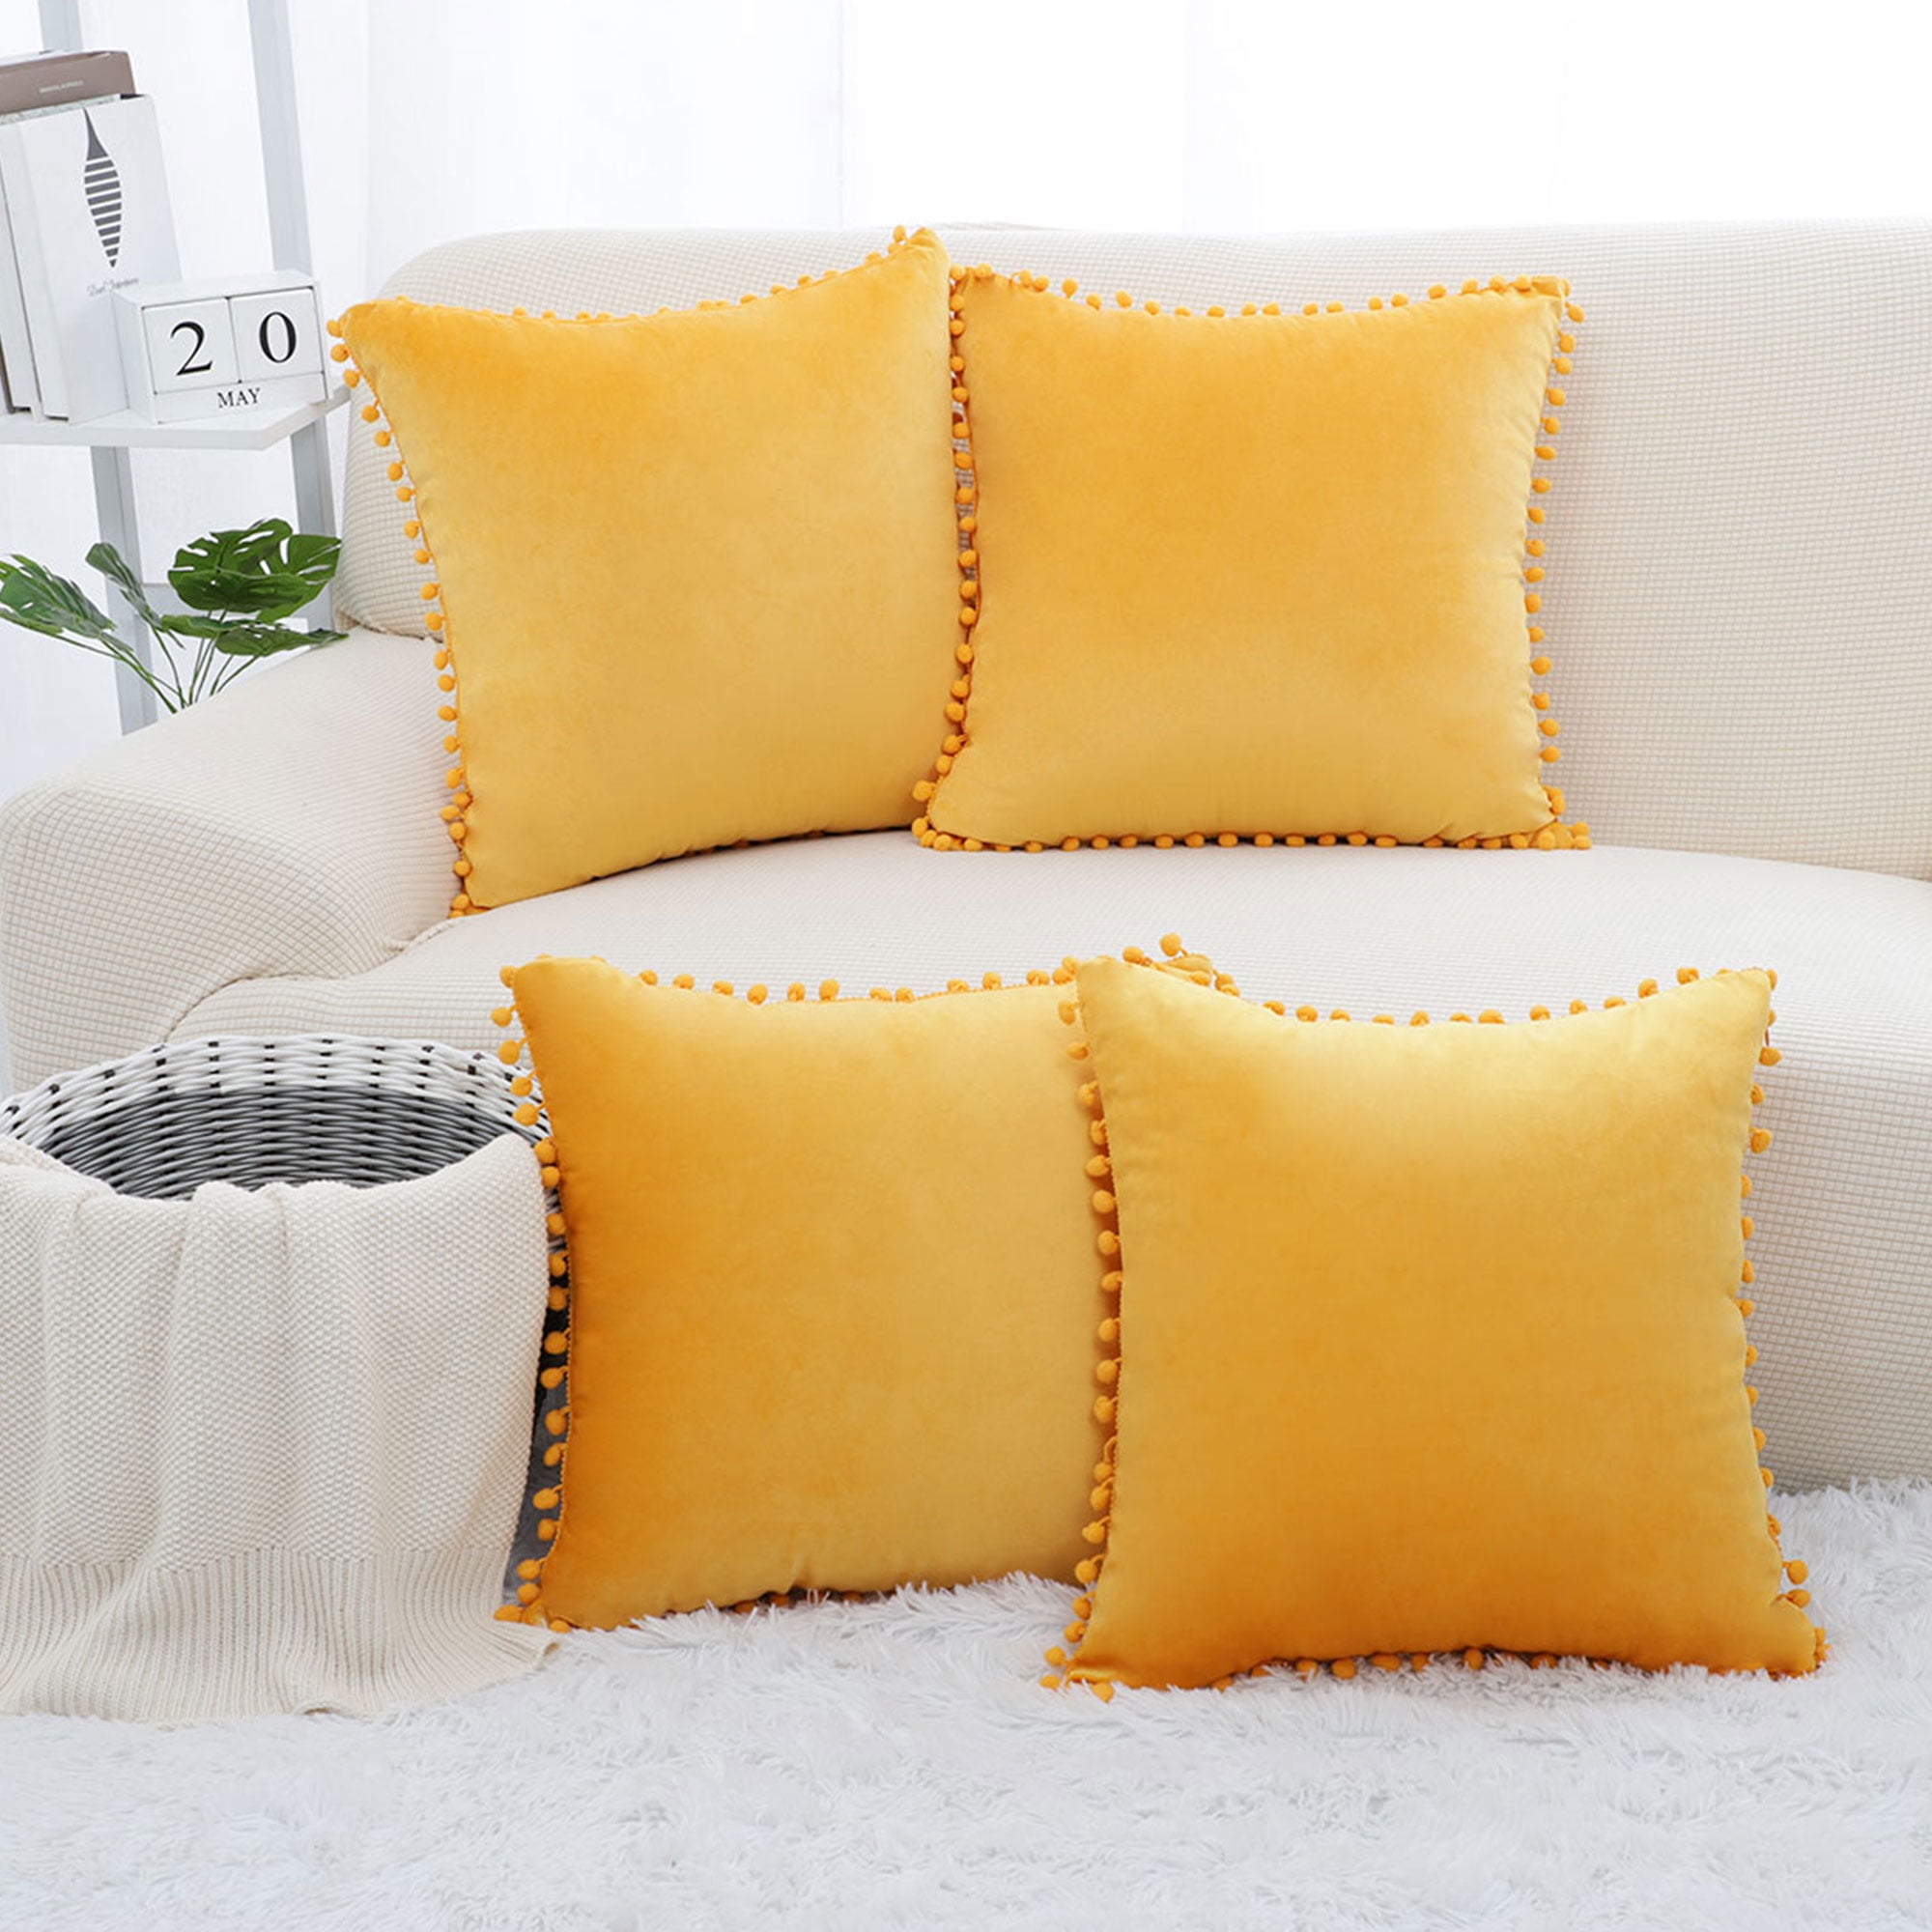 PiccoCasa Velvet Pillow Covers Square Solid Soft Cushion Covers for Sofa Couch Bedroom Car 16 x 16 Golden Yellow 1PCS Pom Pom Christmas Throw Pillow Cover